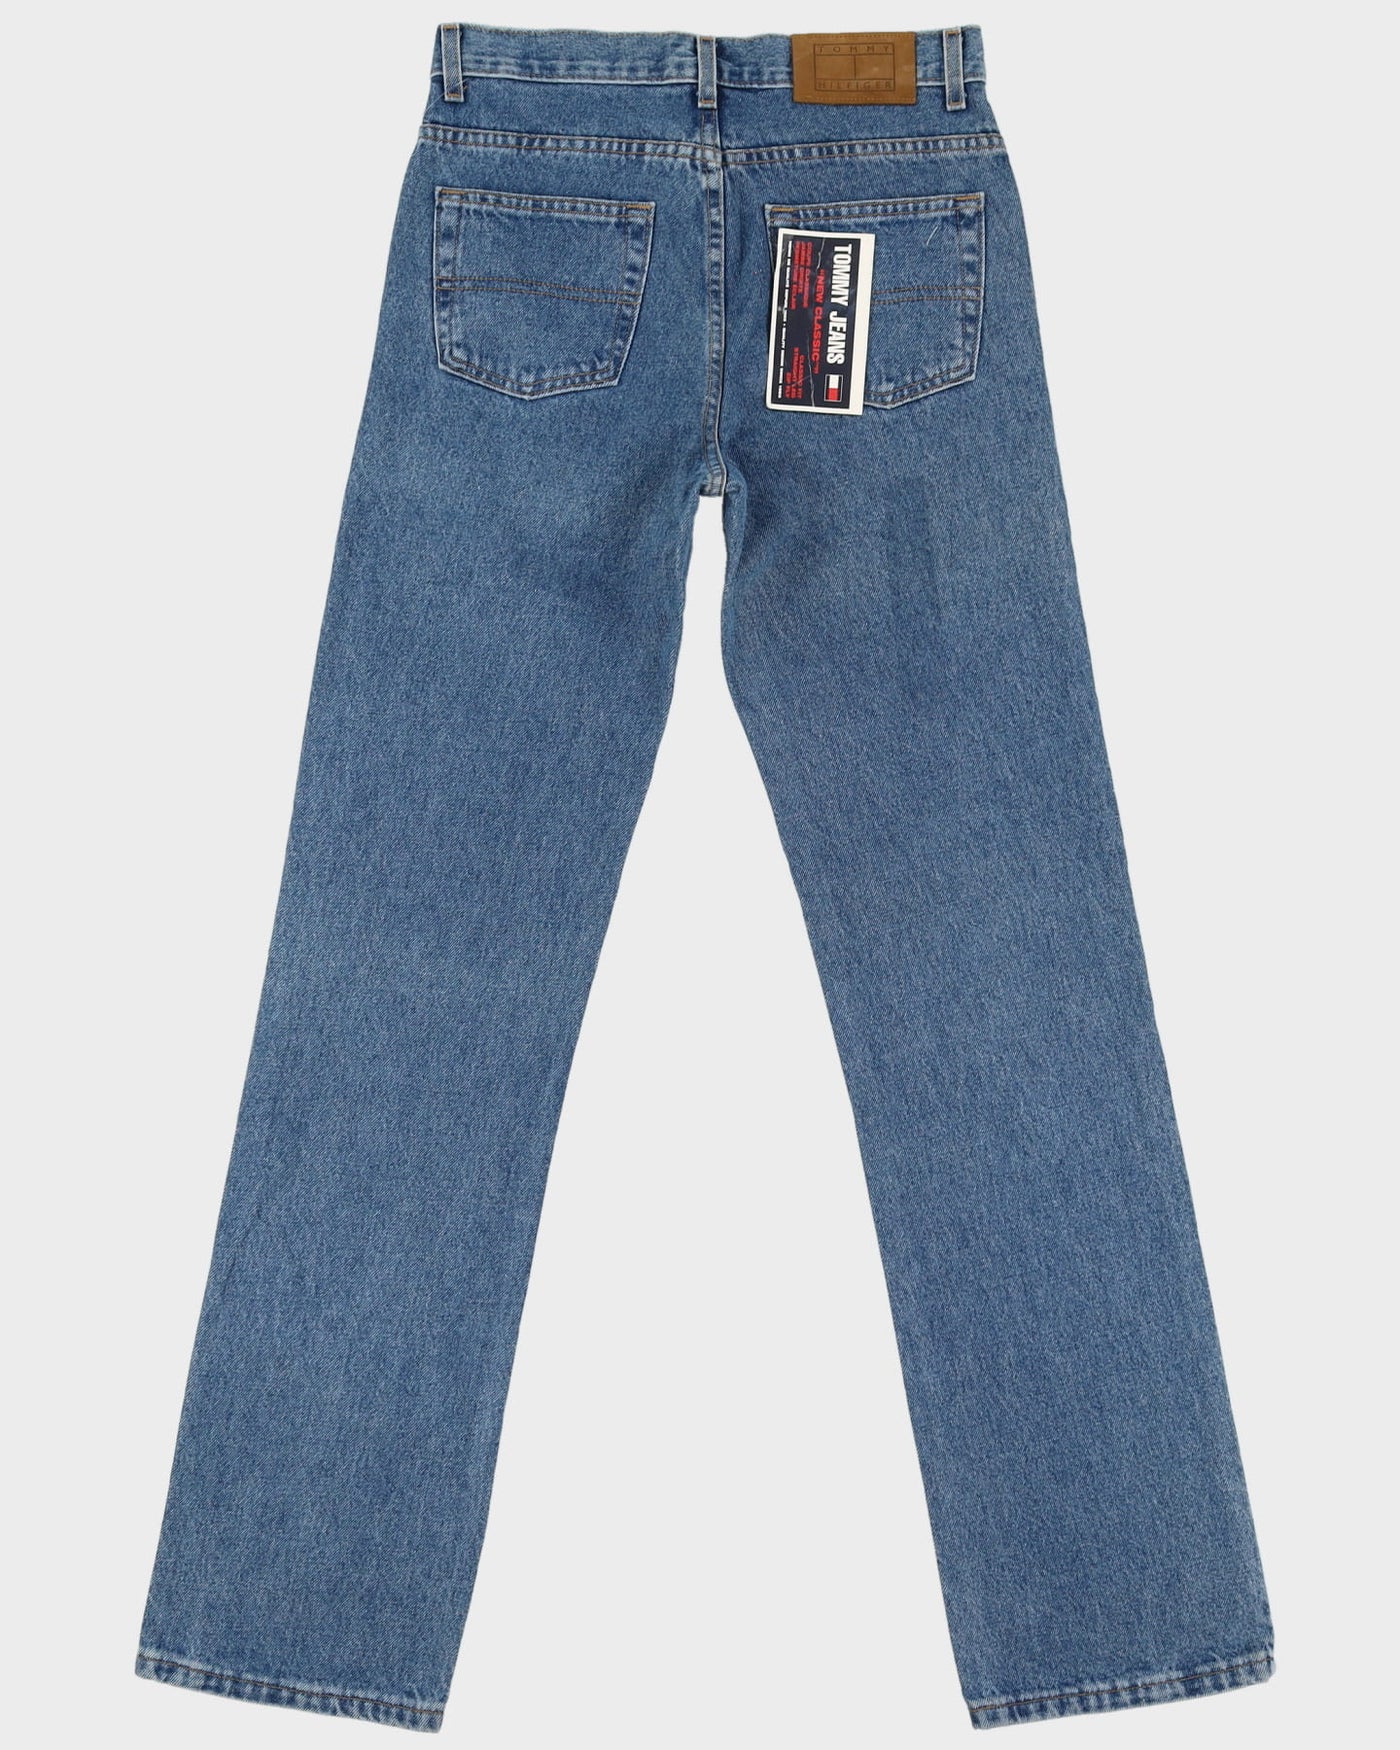 Vintage 90s Deadstock With Tags Tommy Hilfiger Medium Wash Blue Jeans - W29 L34